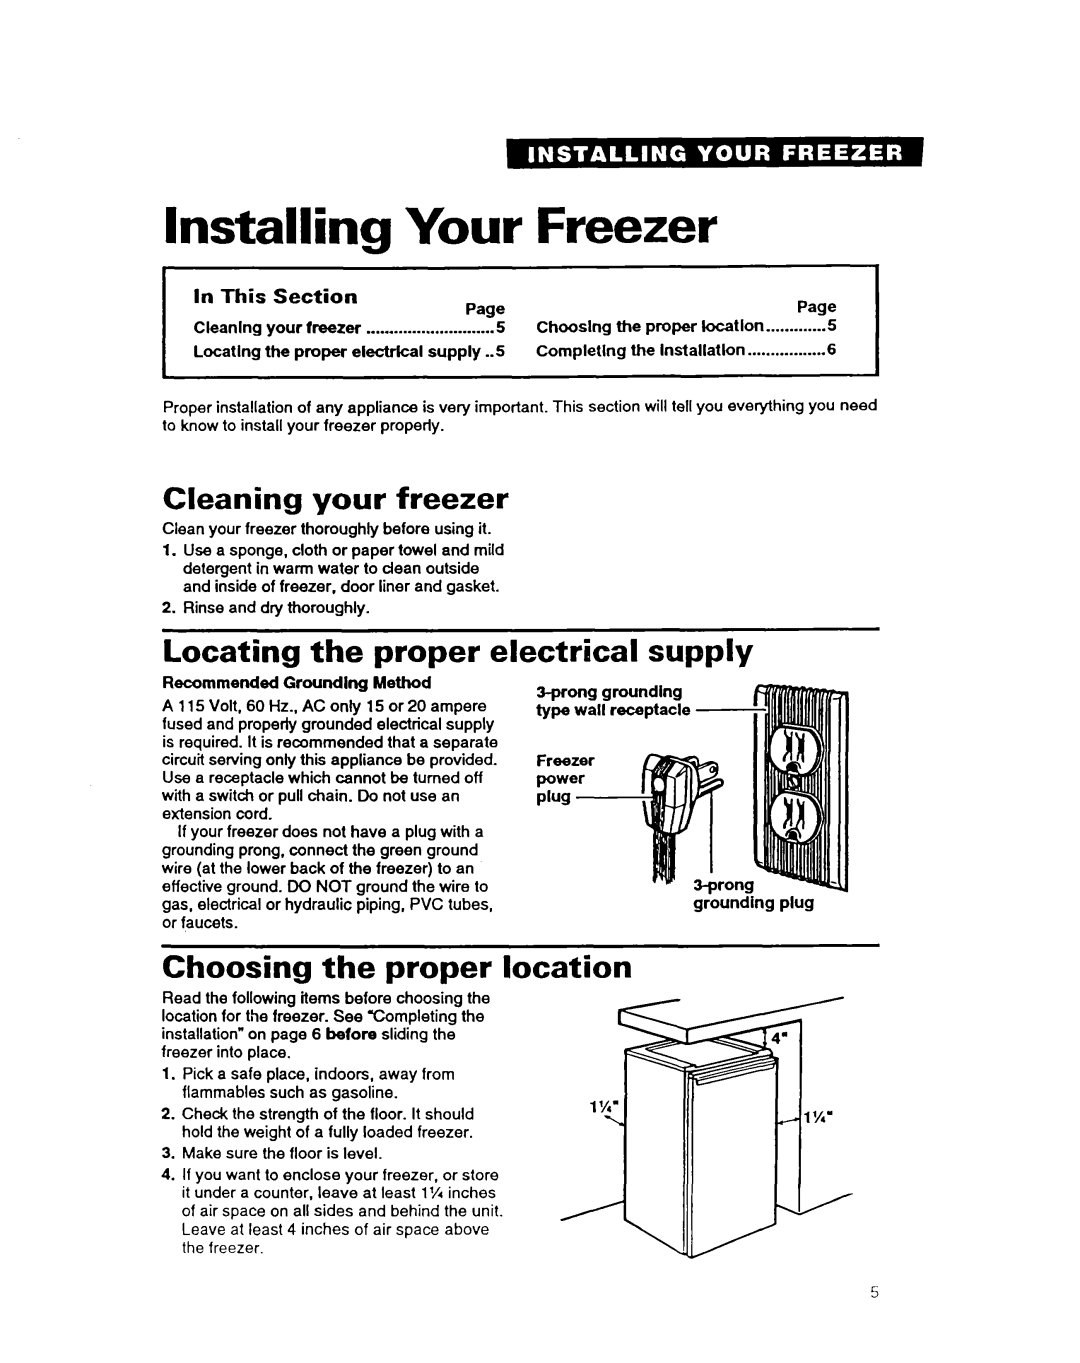 Whirlpool COMPACT FREEZER warranty Installing Your Freezer, Cleaning your freezer, Locating the proper electrical supply 